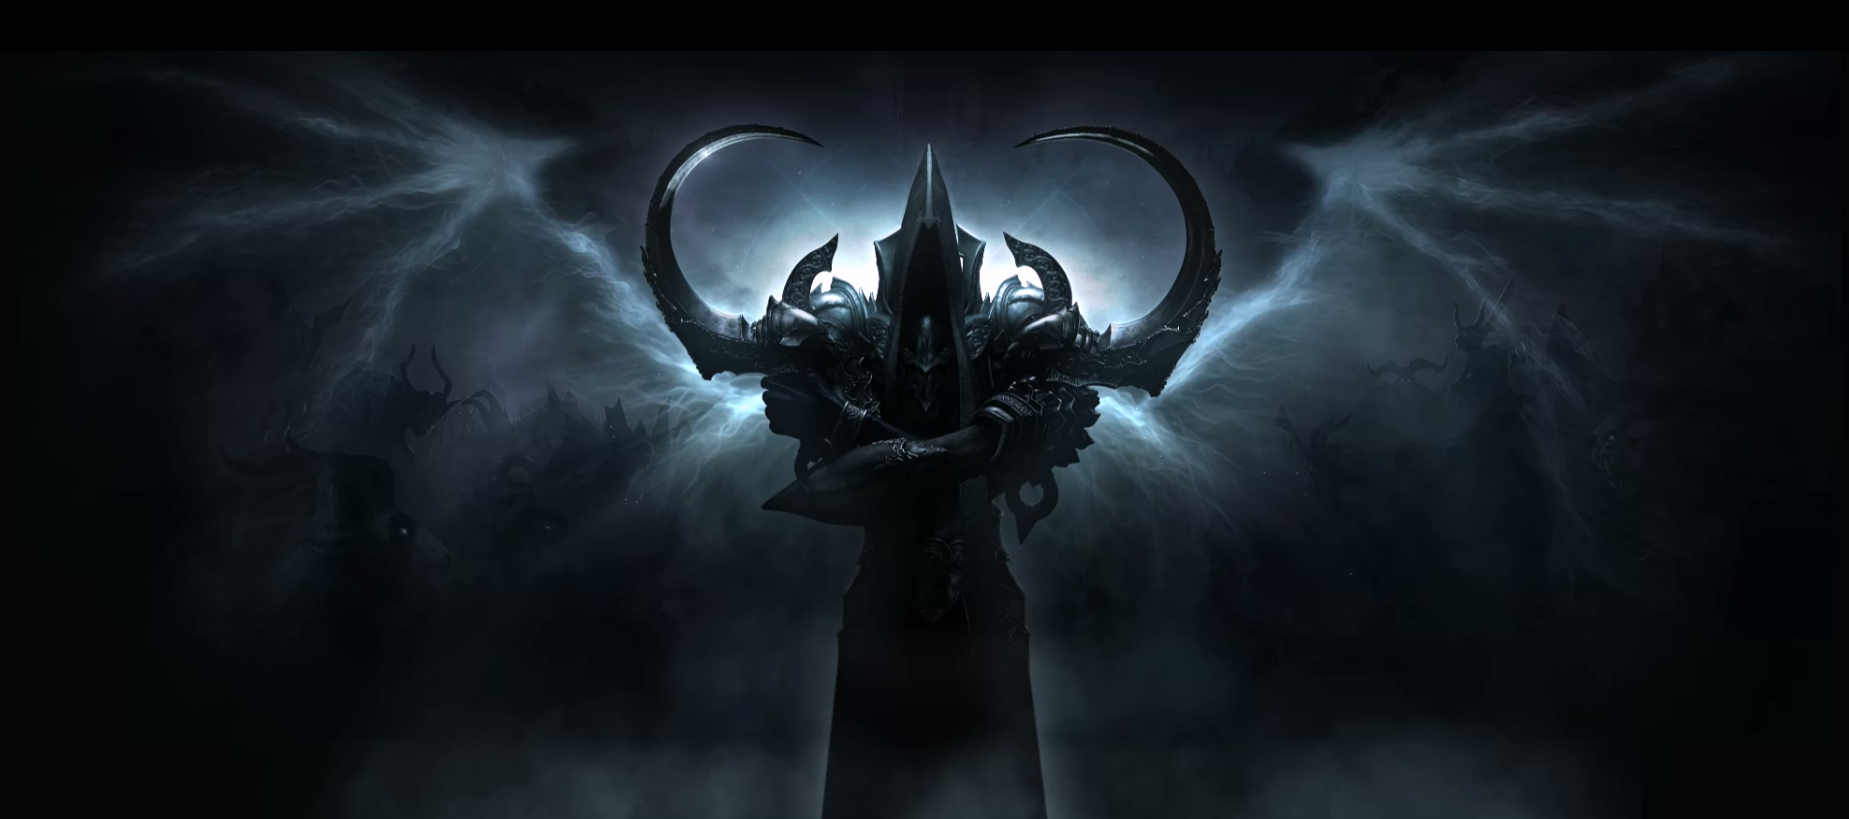 Diablo Iii S First Expansion Pack Ing Reaper Of Souls